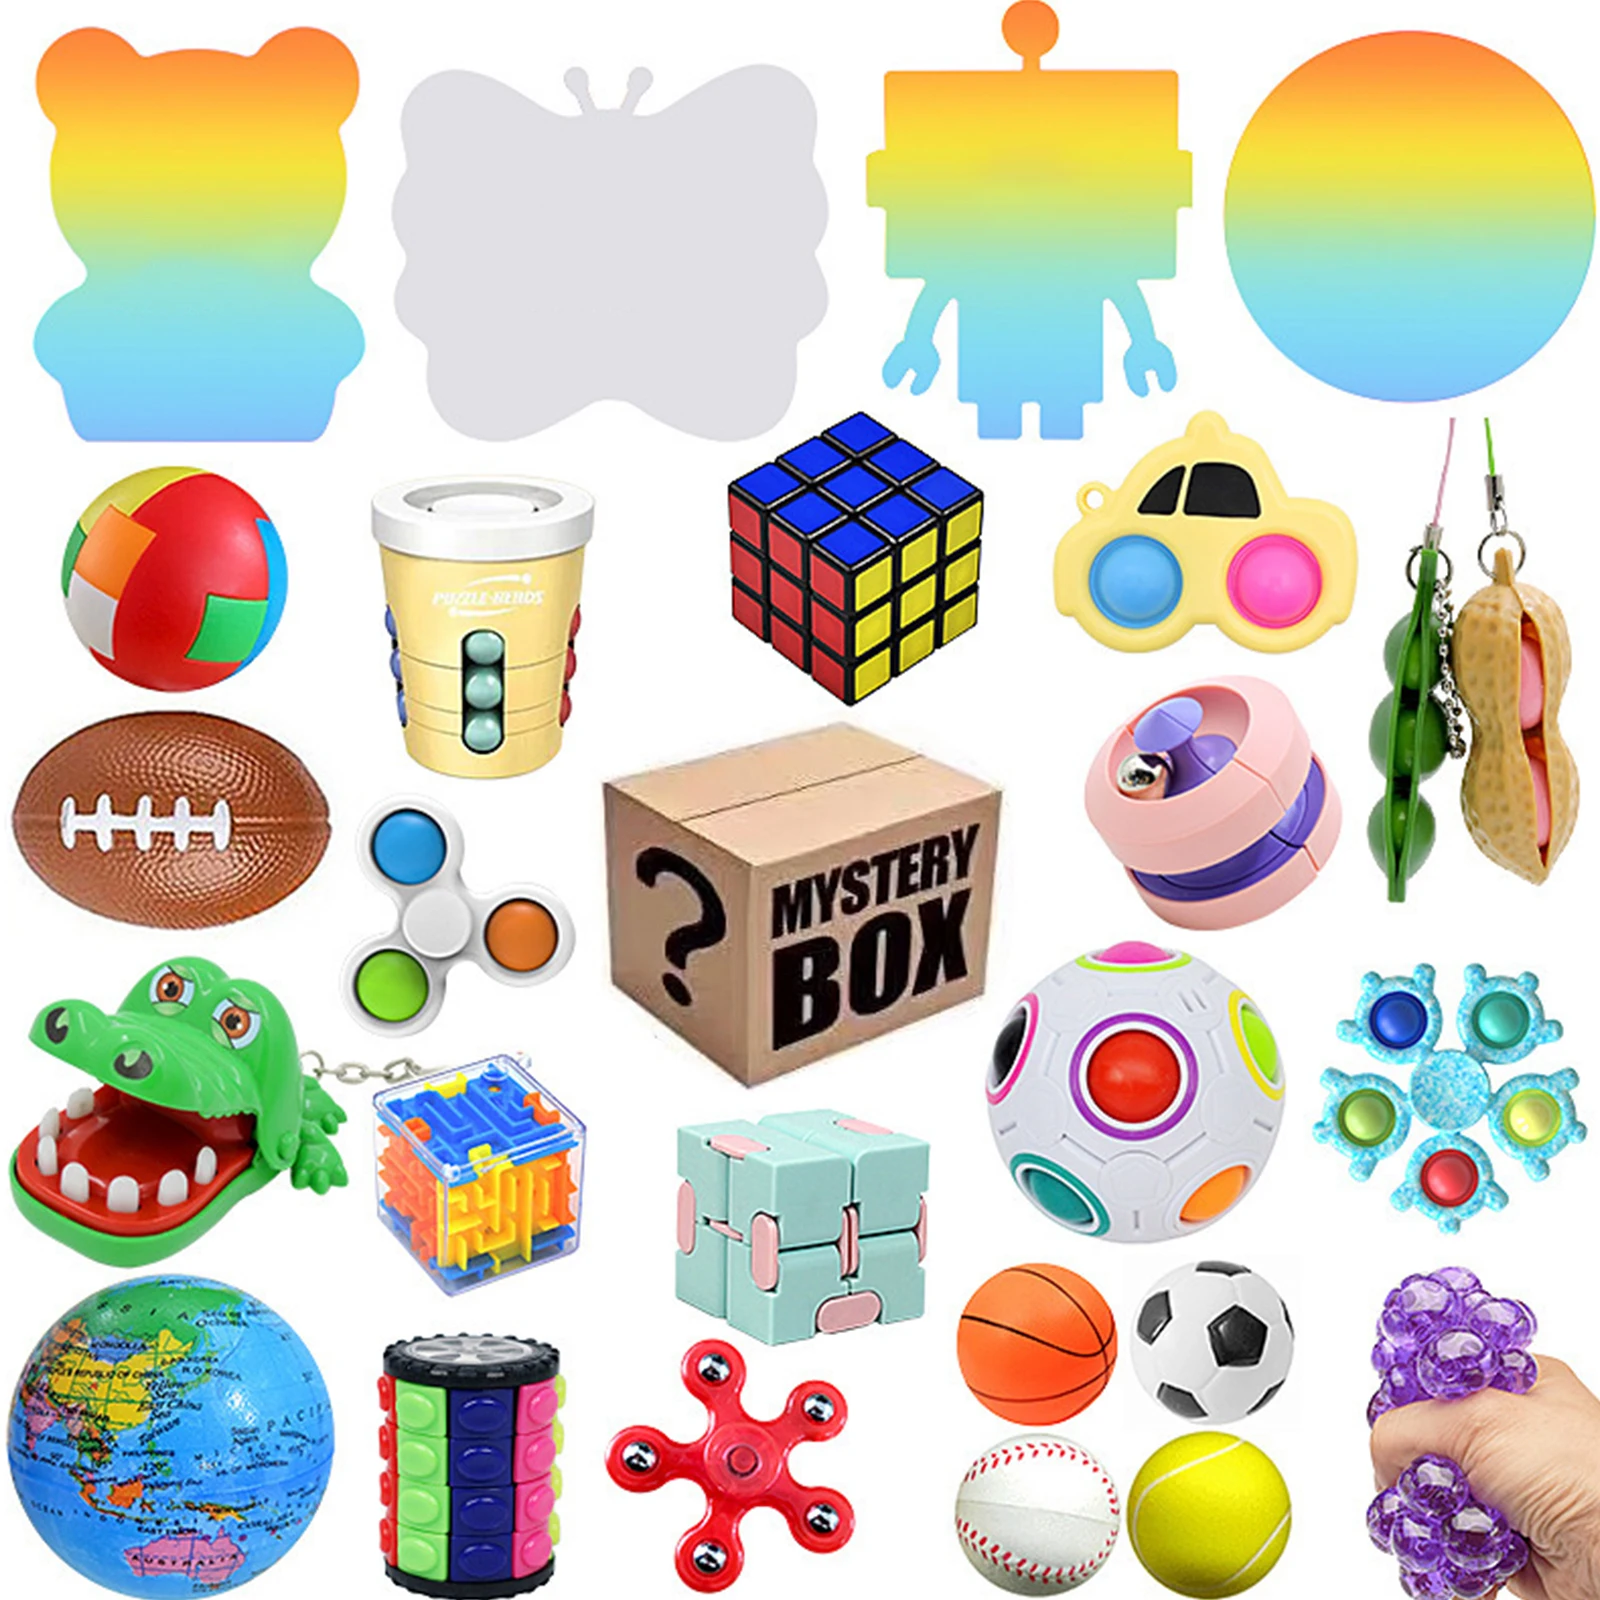 

20pcs Random Decompression Blind Box Set Anti-rodent Pioneer Gyro Bubble Music Cube Squeeze Ball Blind Box Toy